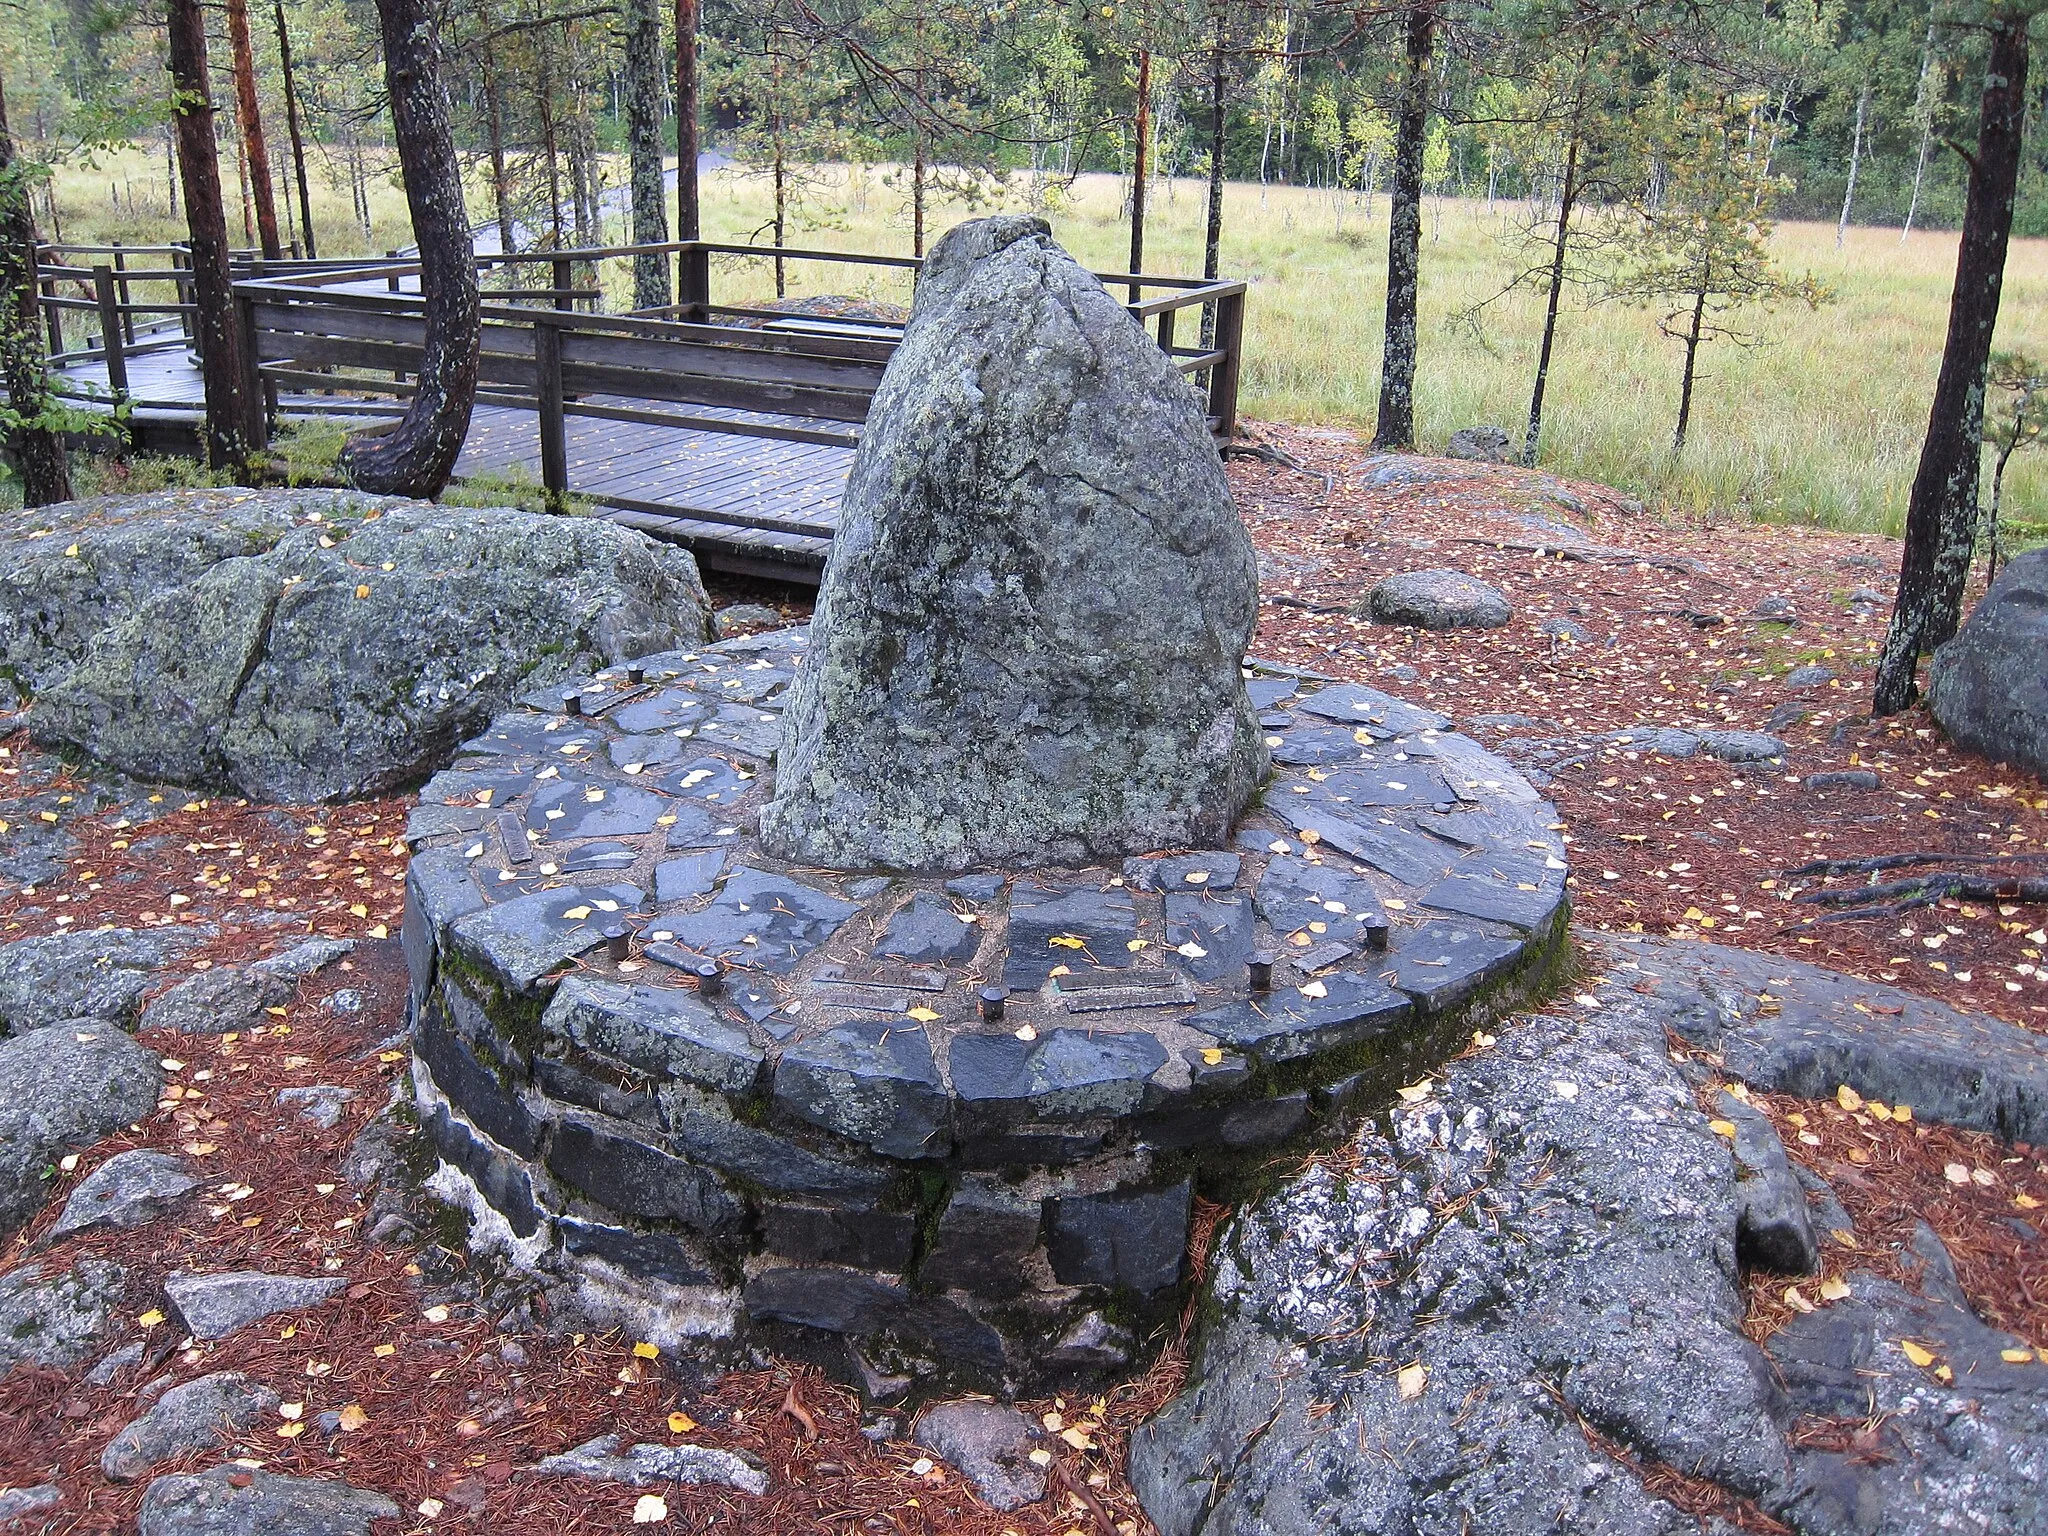 Photo showing: Kuhankuono Boundary stone in Kurjenrahka National Park, Finland.
In background you can see the wheelchair trail.